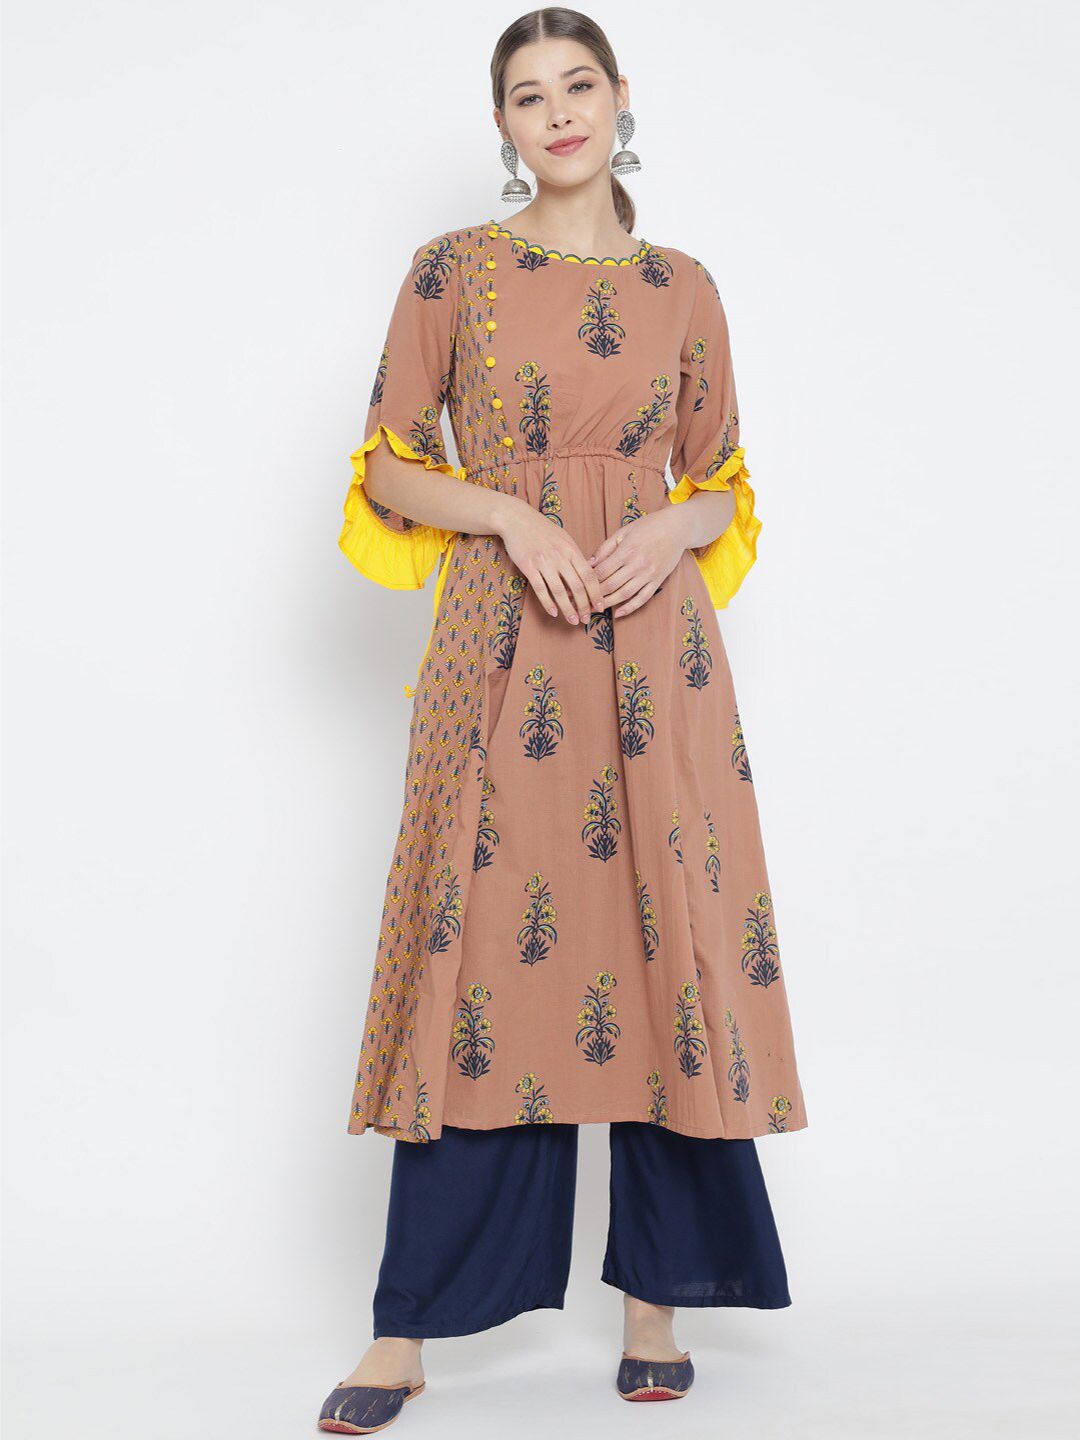 YASH GALLERY Multicoloured & Yellow Floral Printed Boat Neck Empire Kurti Price in India